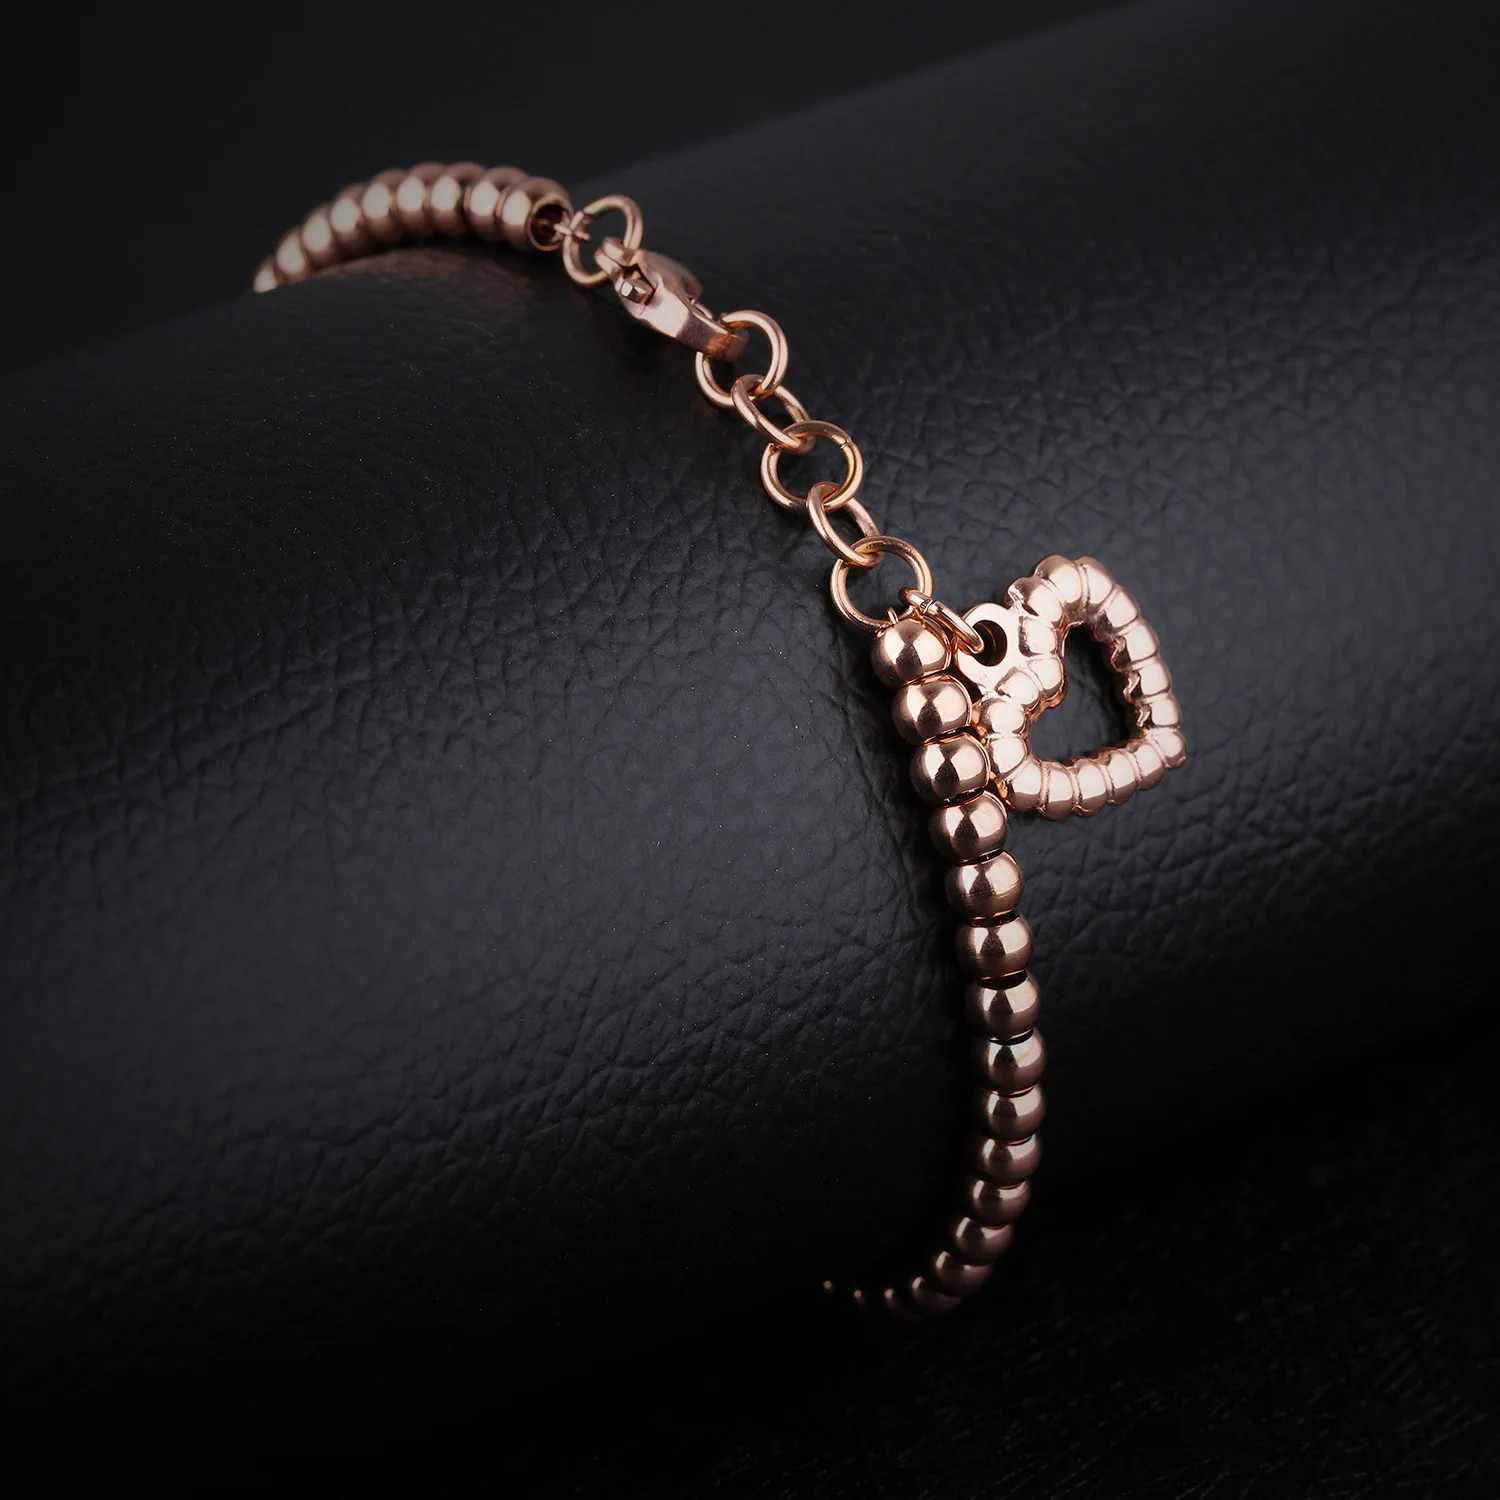 

HongTong Artistic Girl Hand Ornaments Stainless Steel Love Heart Rose Gold Exquisite Bracelet, Picture shown